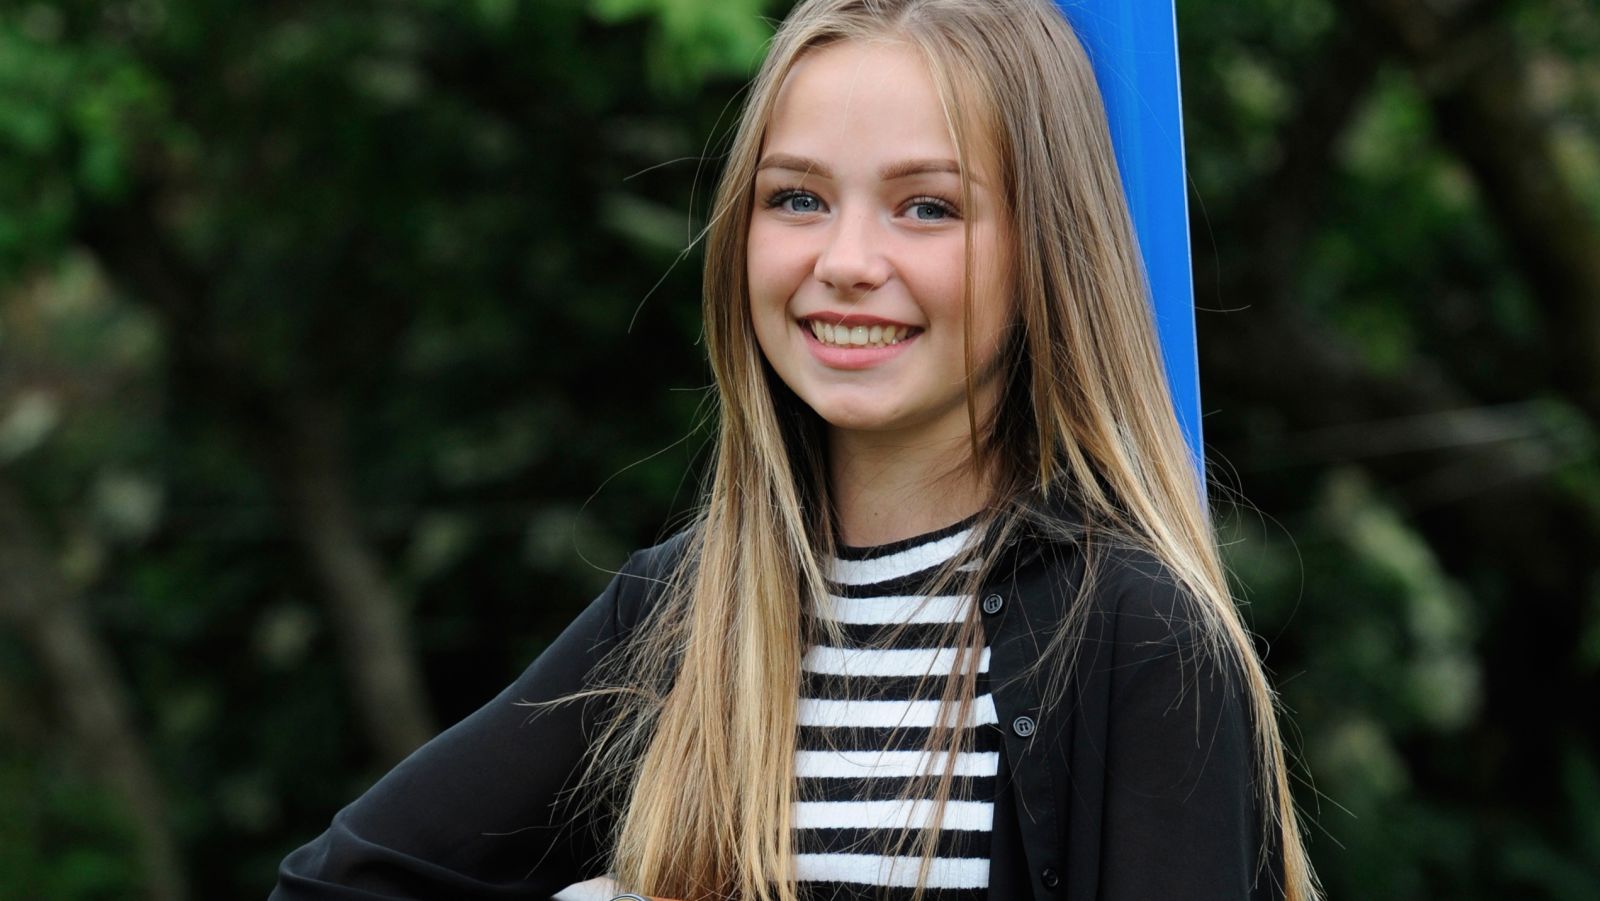 Britain's Got Talent's Connie Talbot now aged 14 and looks like this